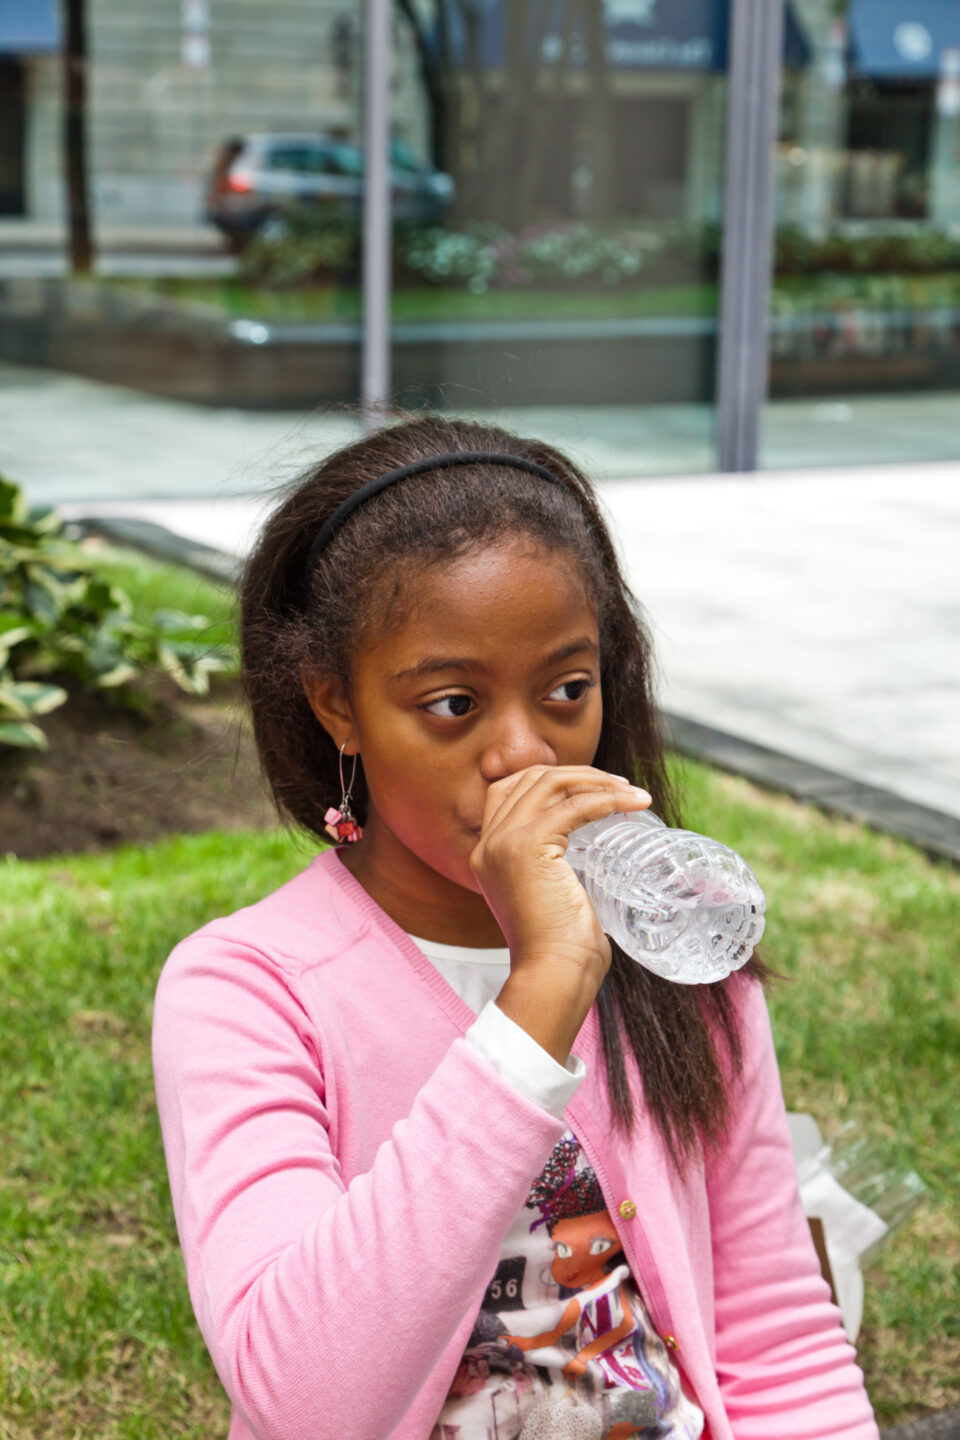 A student takes a drink of water